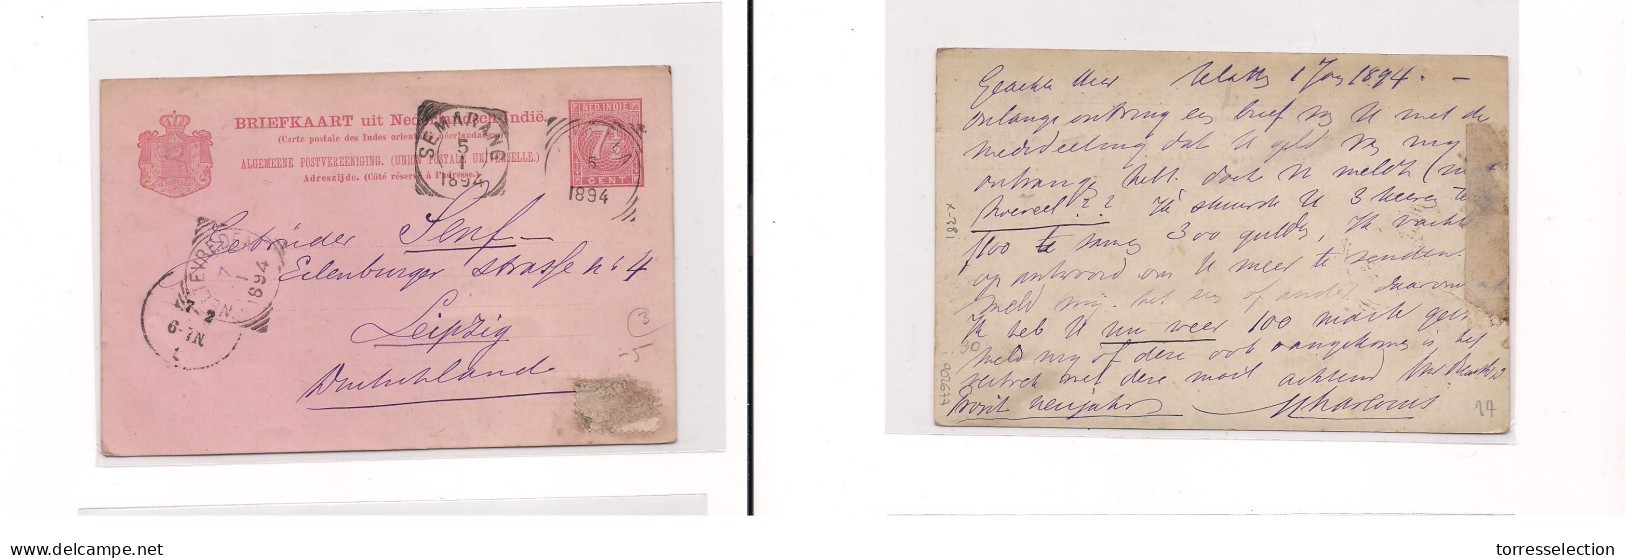 DUTCH INDIES. Dutch Indies - Cover - 1894 Neltea To Leipzig Germany Stat Card. Easy Deal. XSALE. - Netherlands Indies